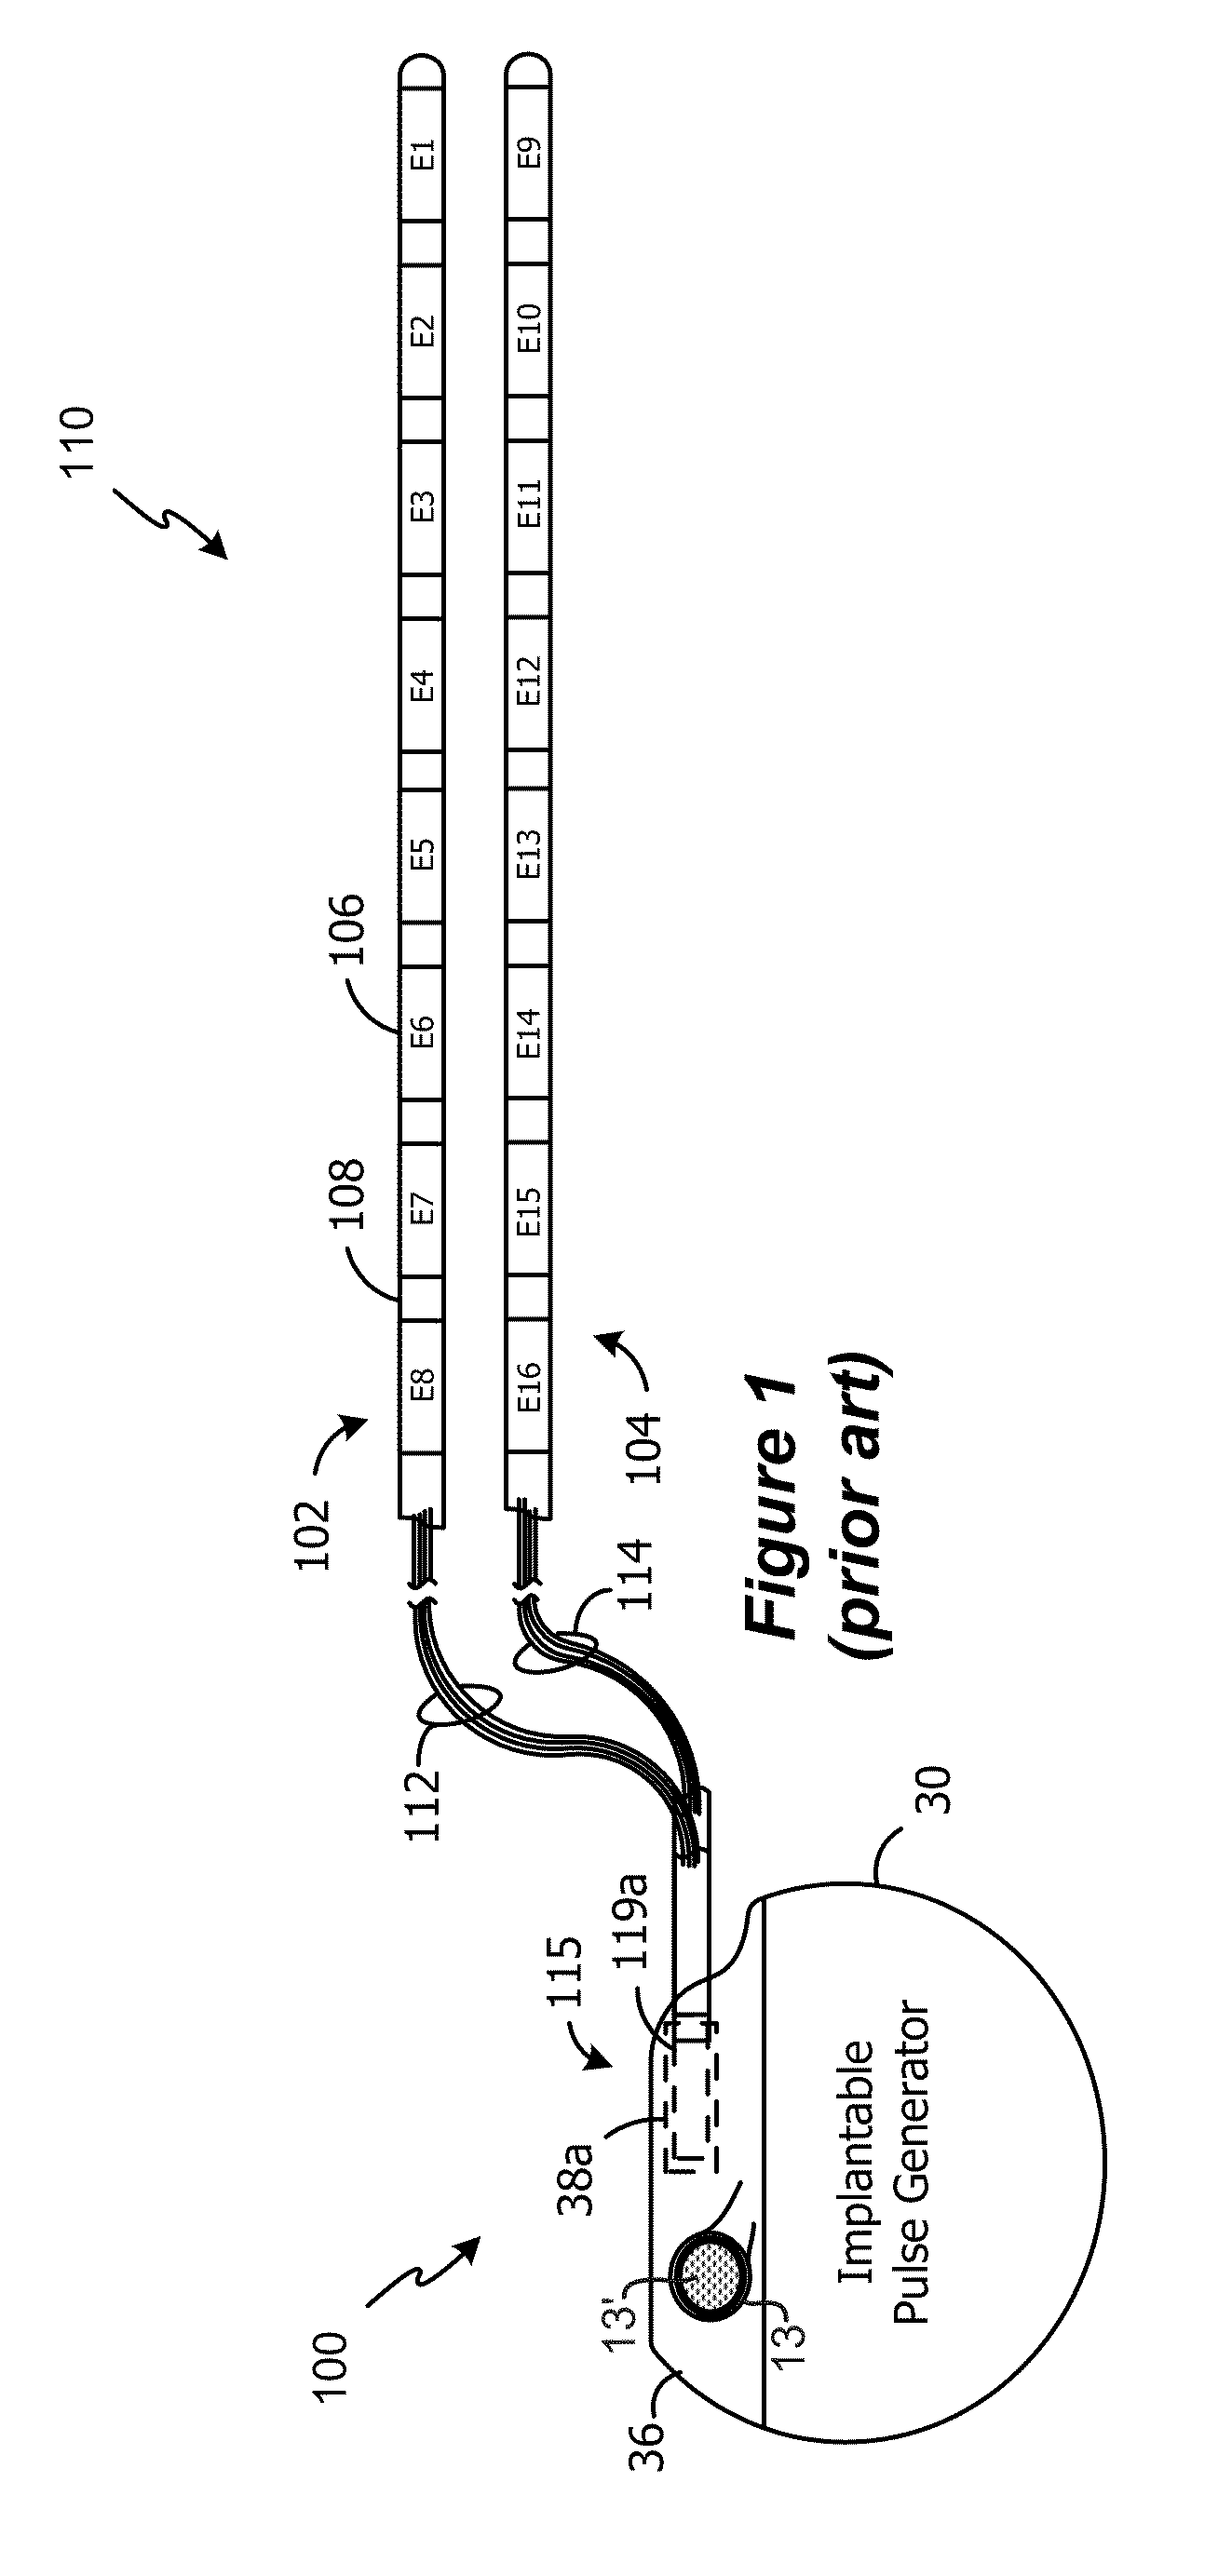 External device for an implantable medical system having accessible contraindication information